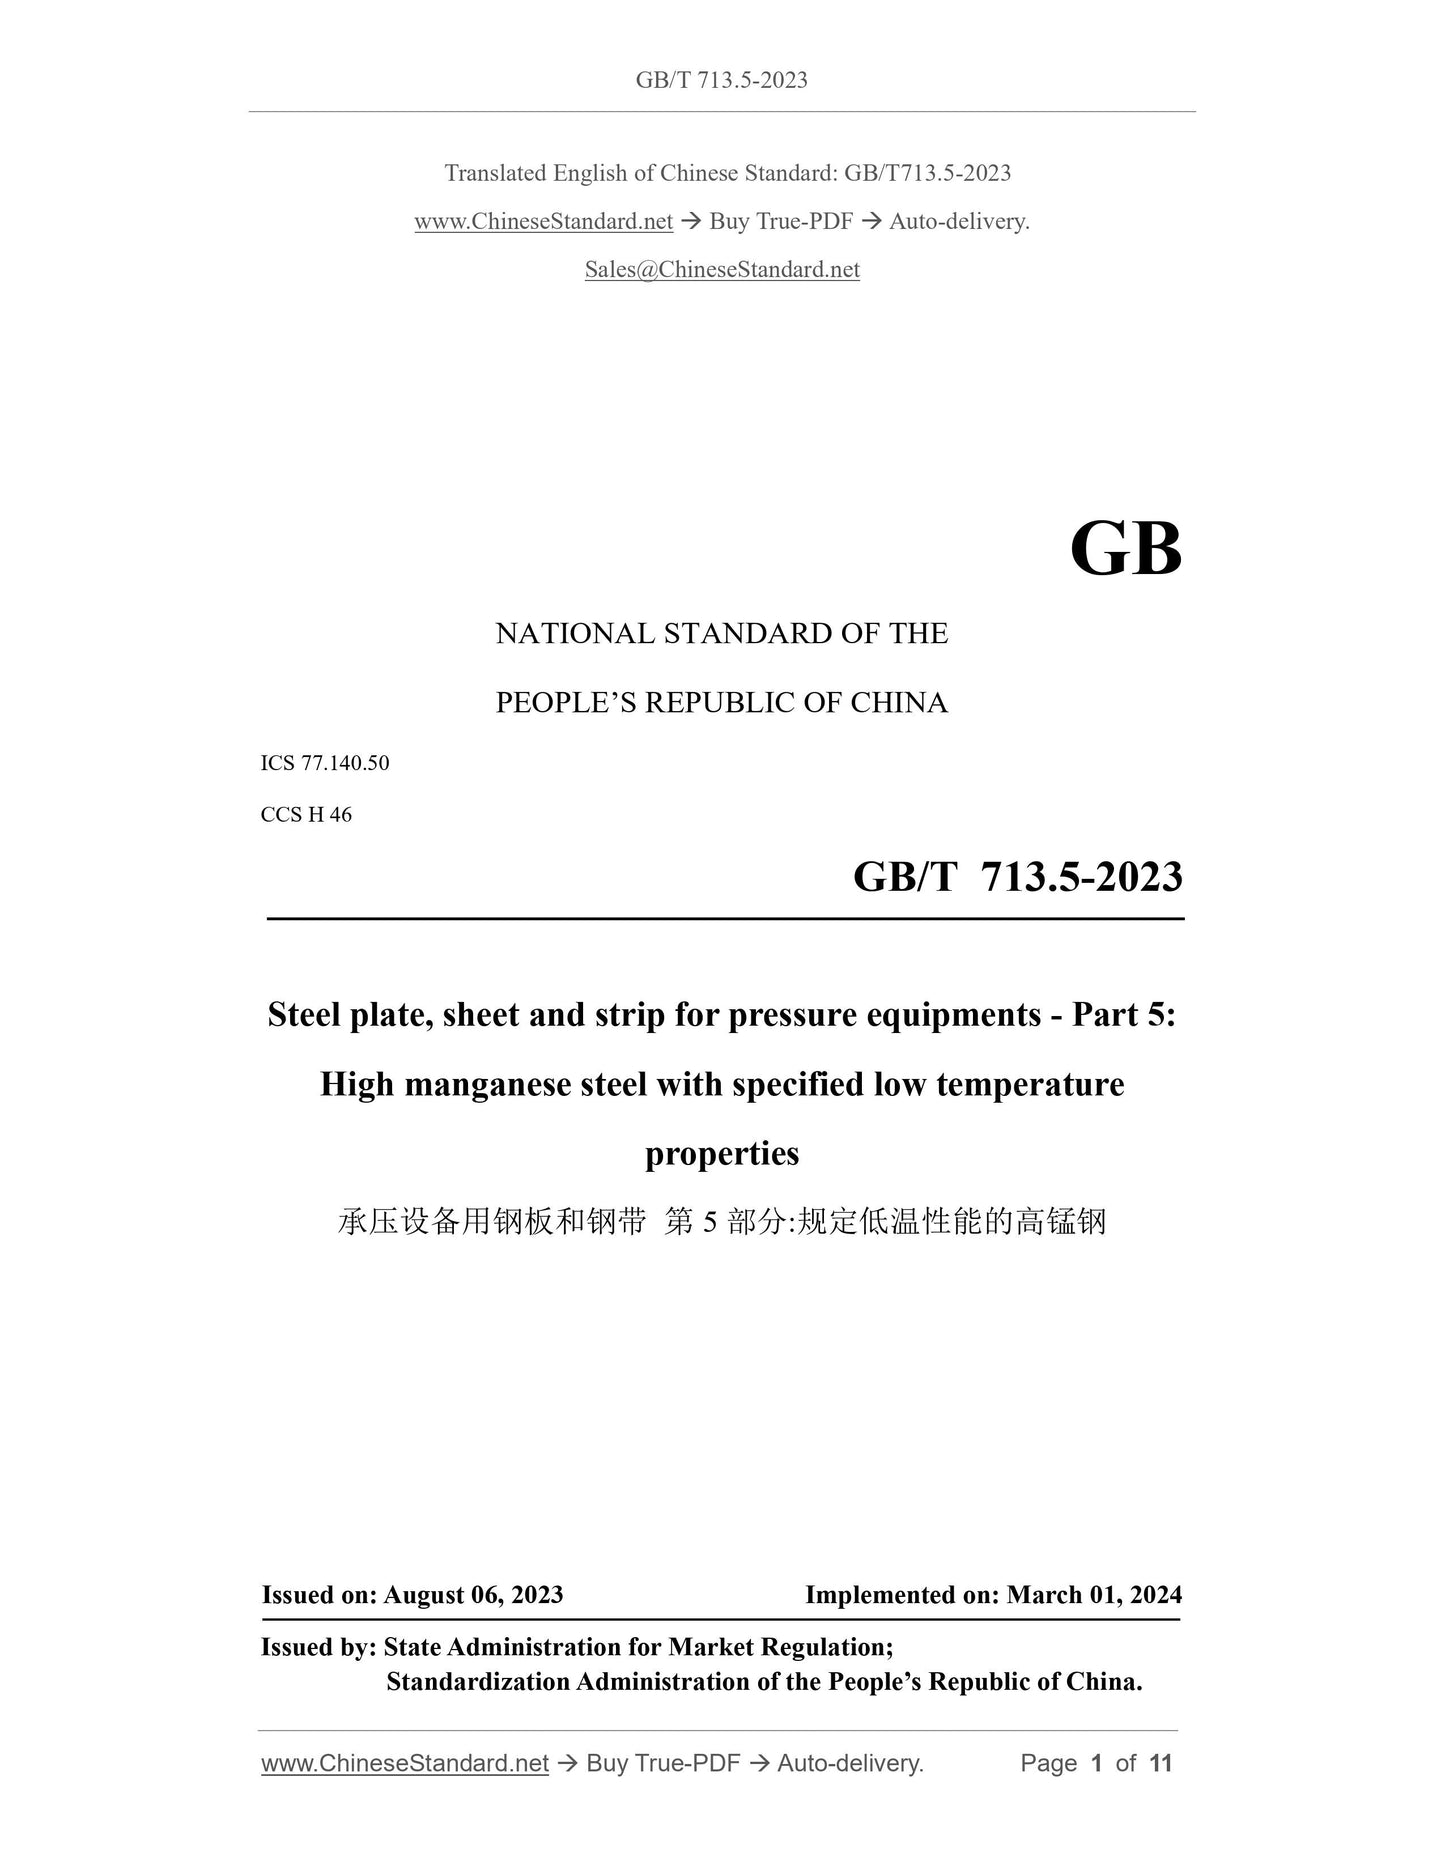 GB/T 713.5-2023 Page 1